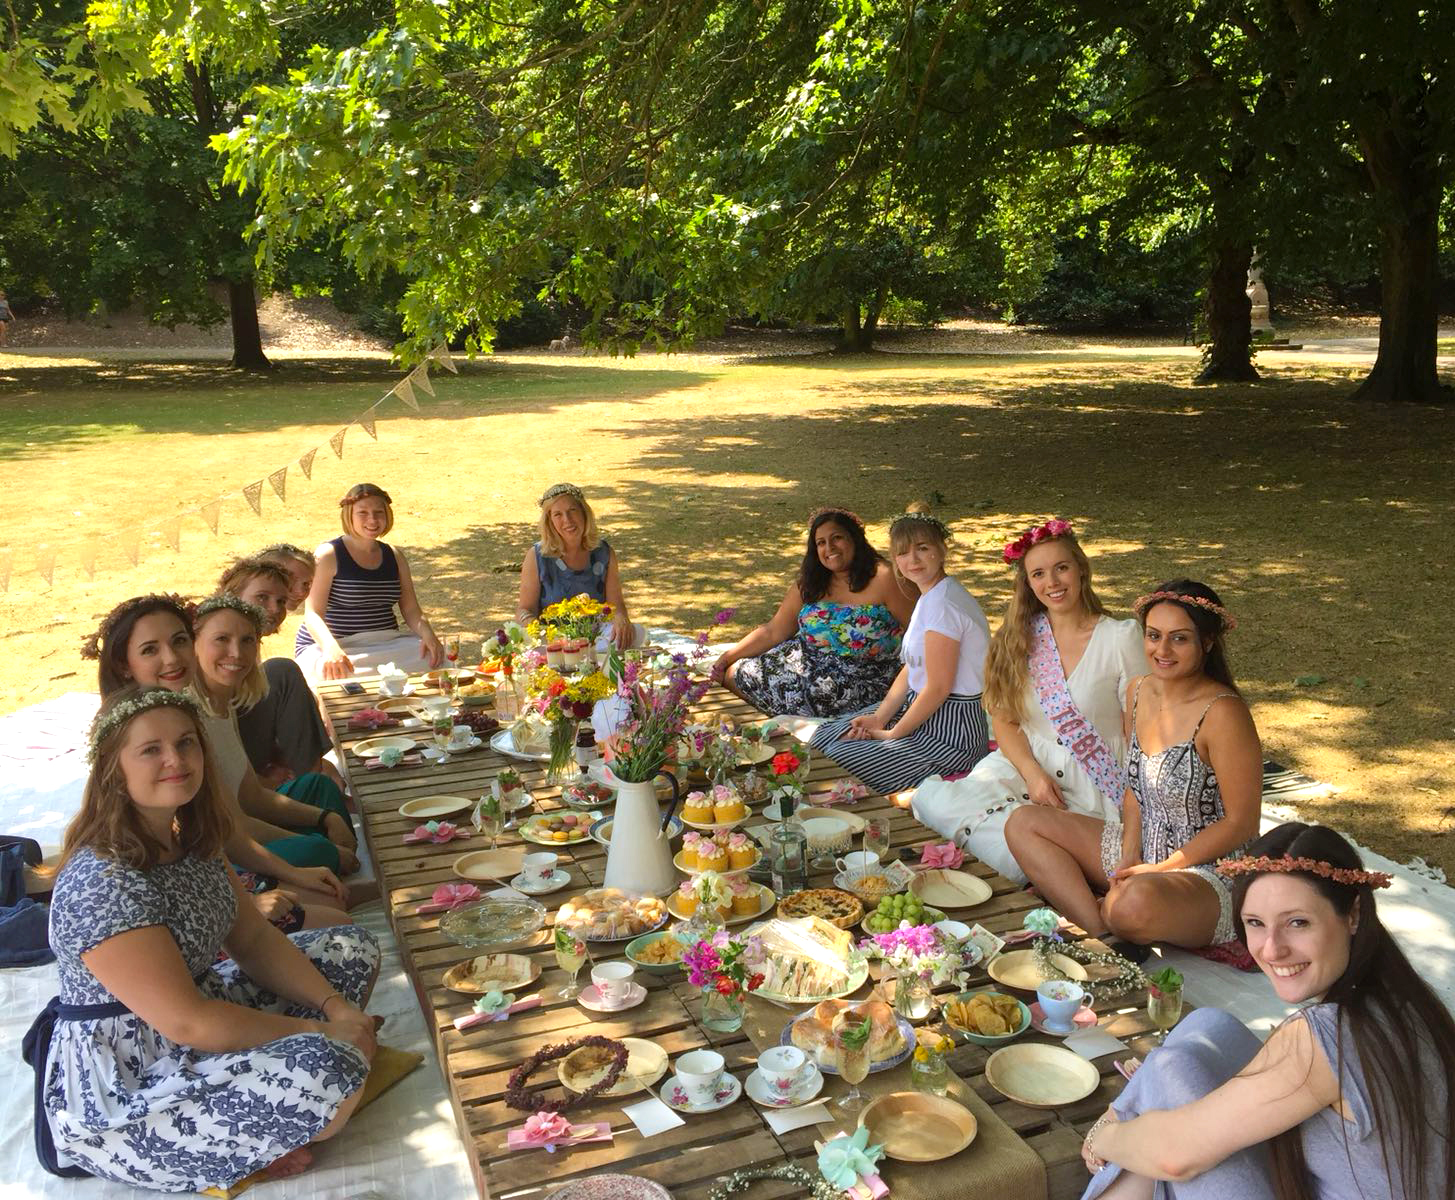 Fun hen do picnic in the park with flowers and crates etc...